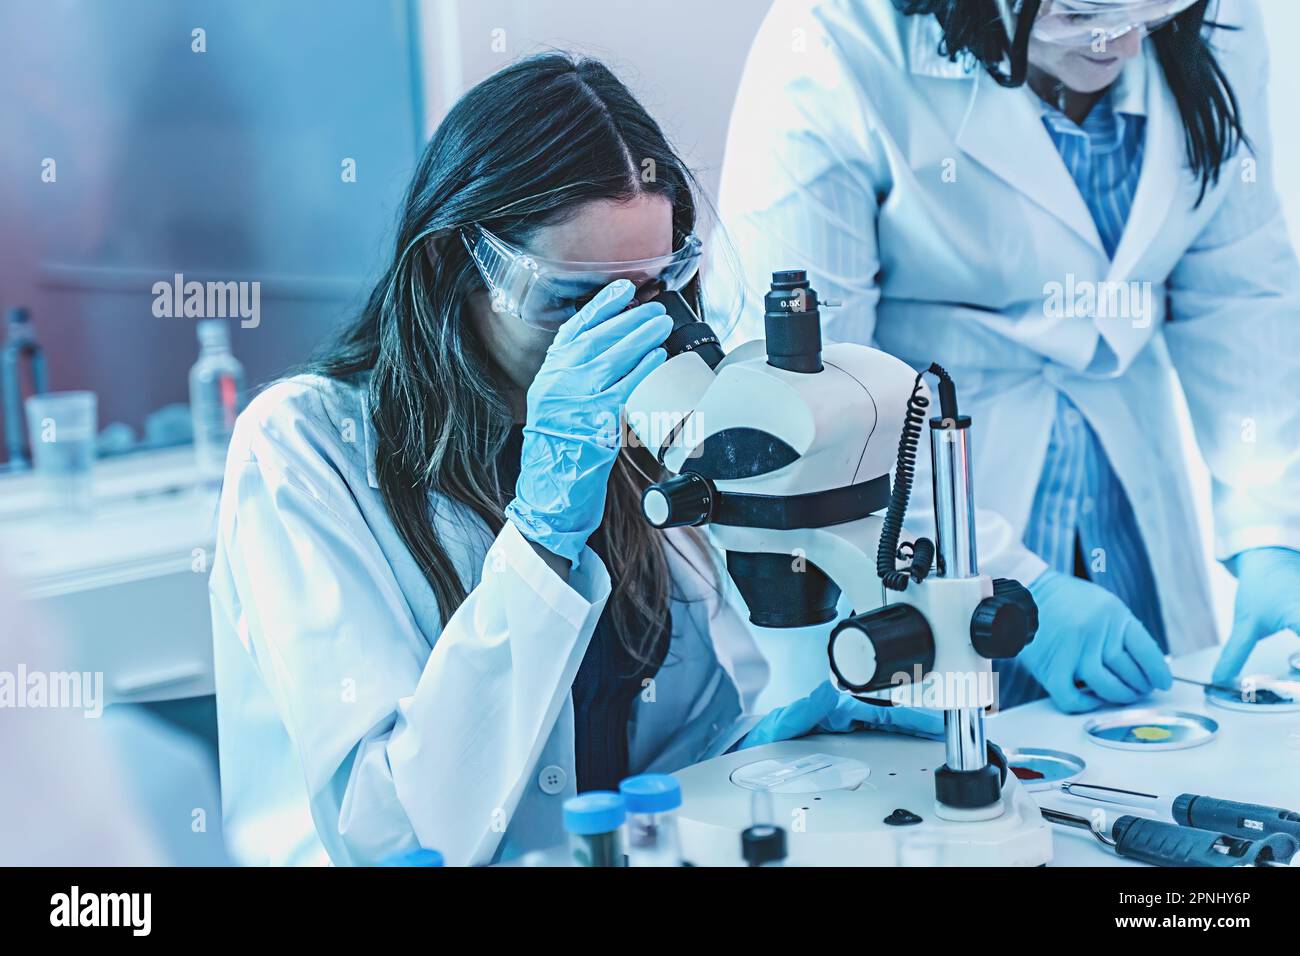 Young female scientist in lab coat and safety goggles examining a sample under a microscope in a softly lit chemical lab with blue and red lights. Stock Photo